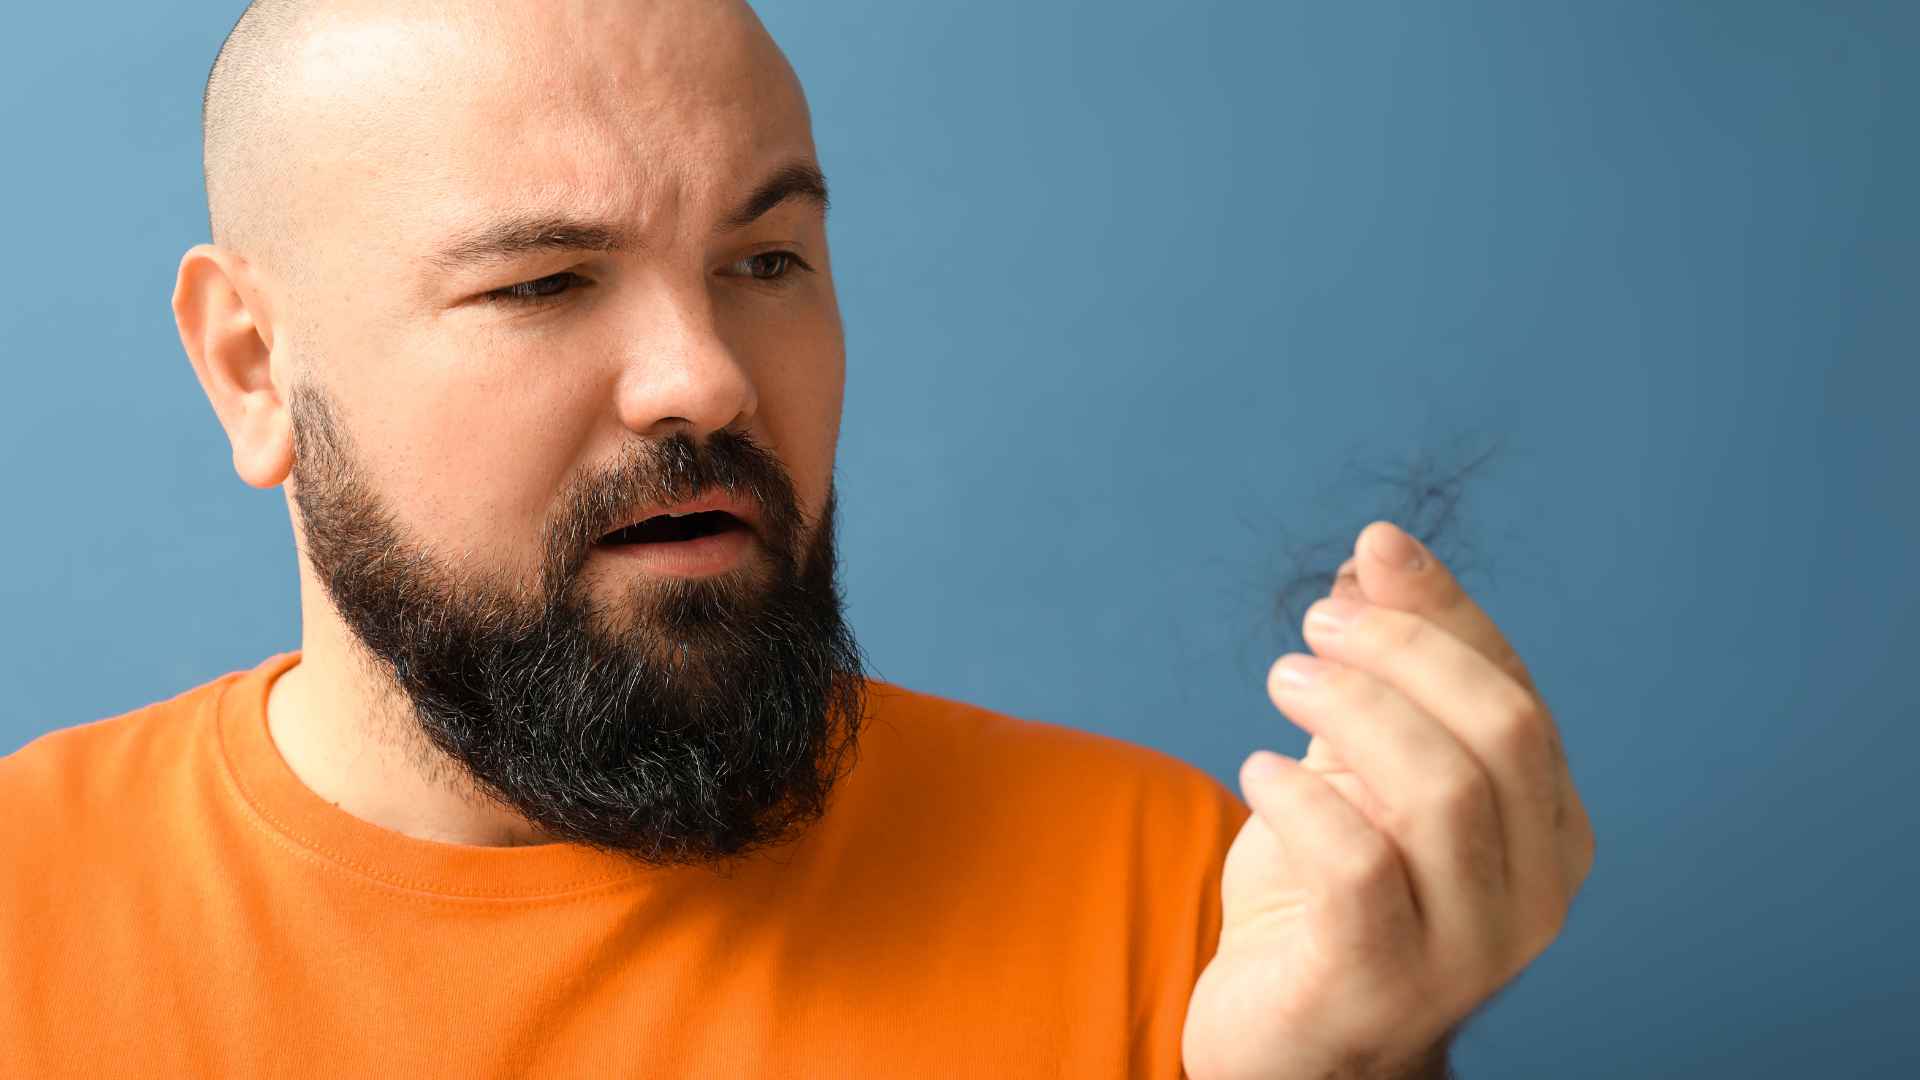 which medications cause hair loss